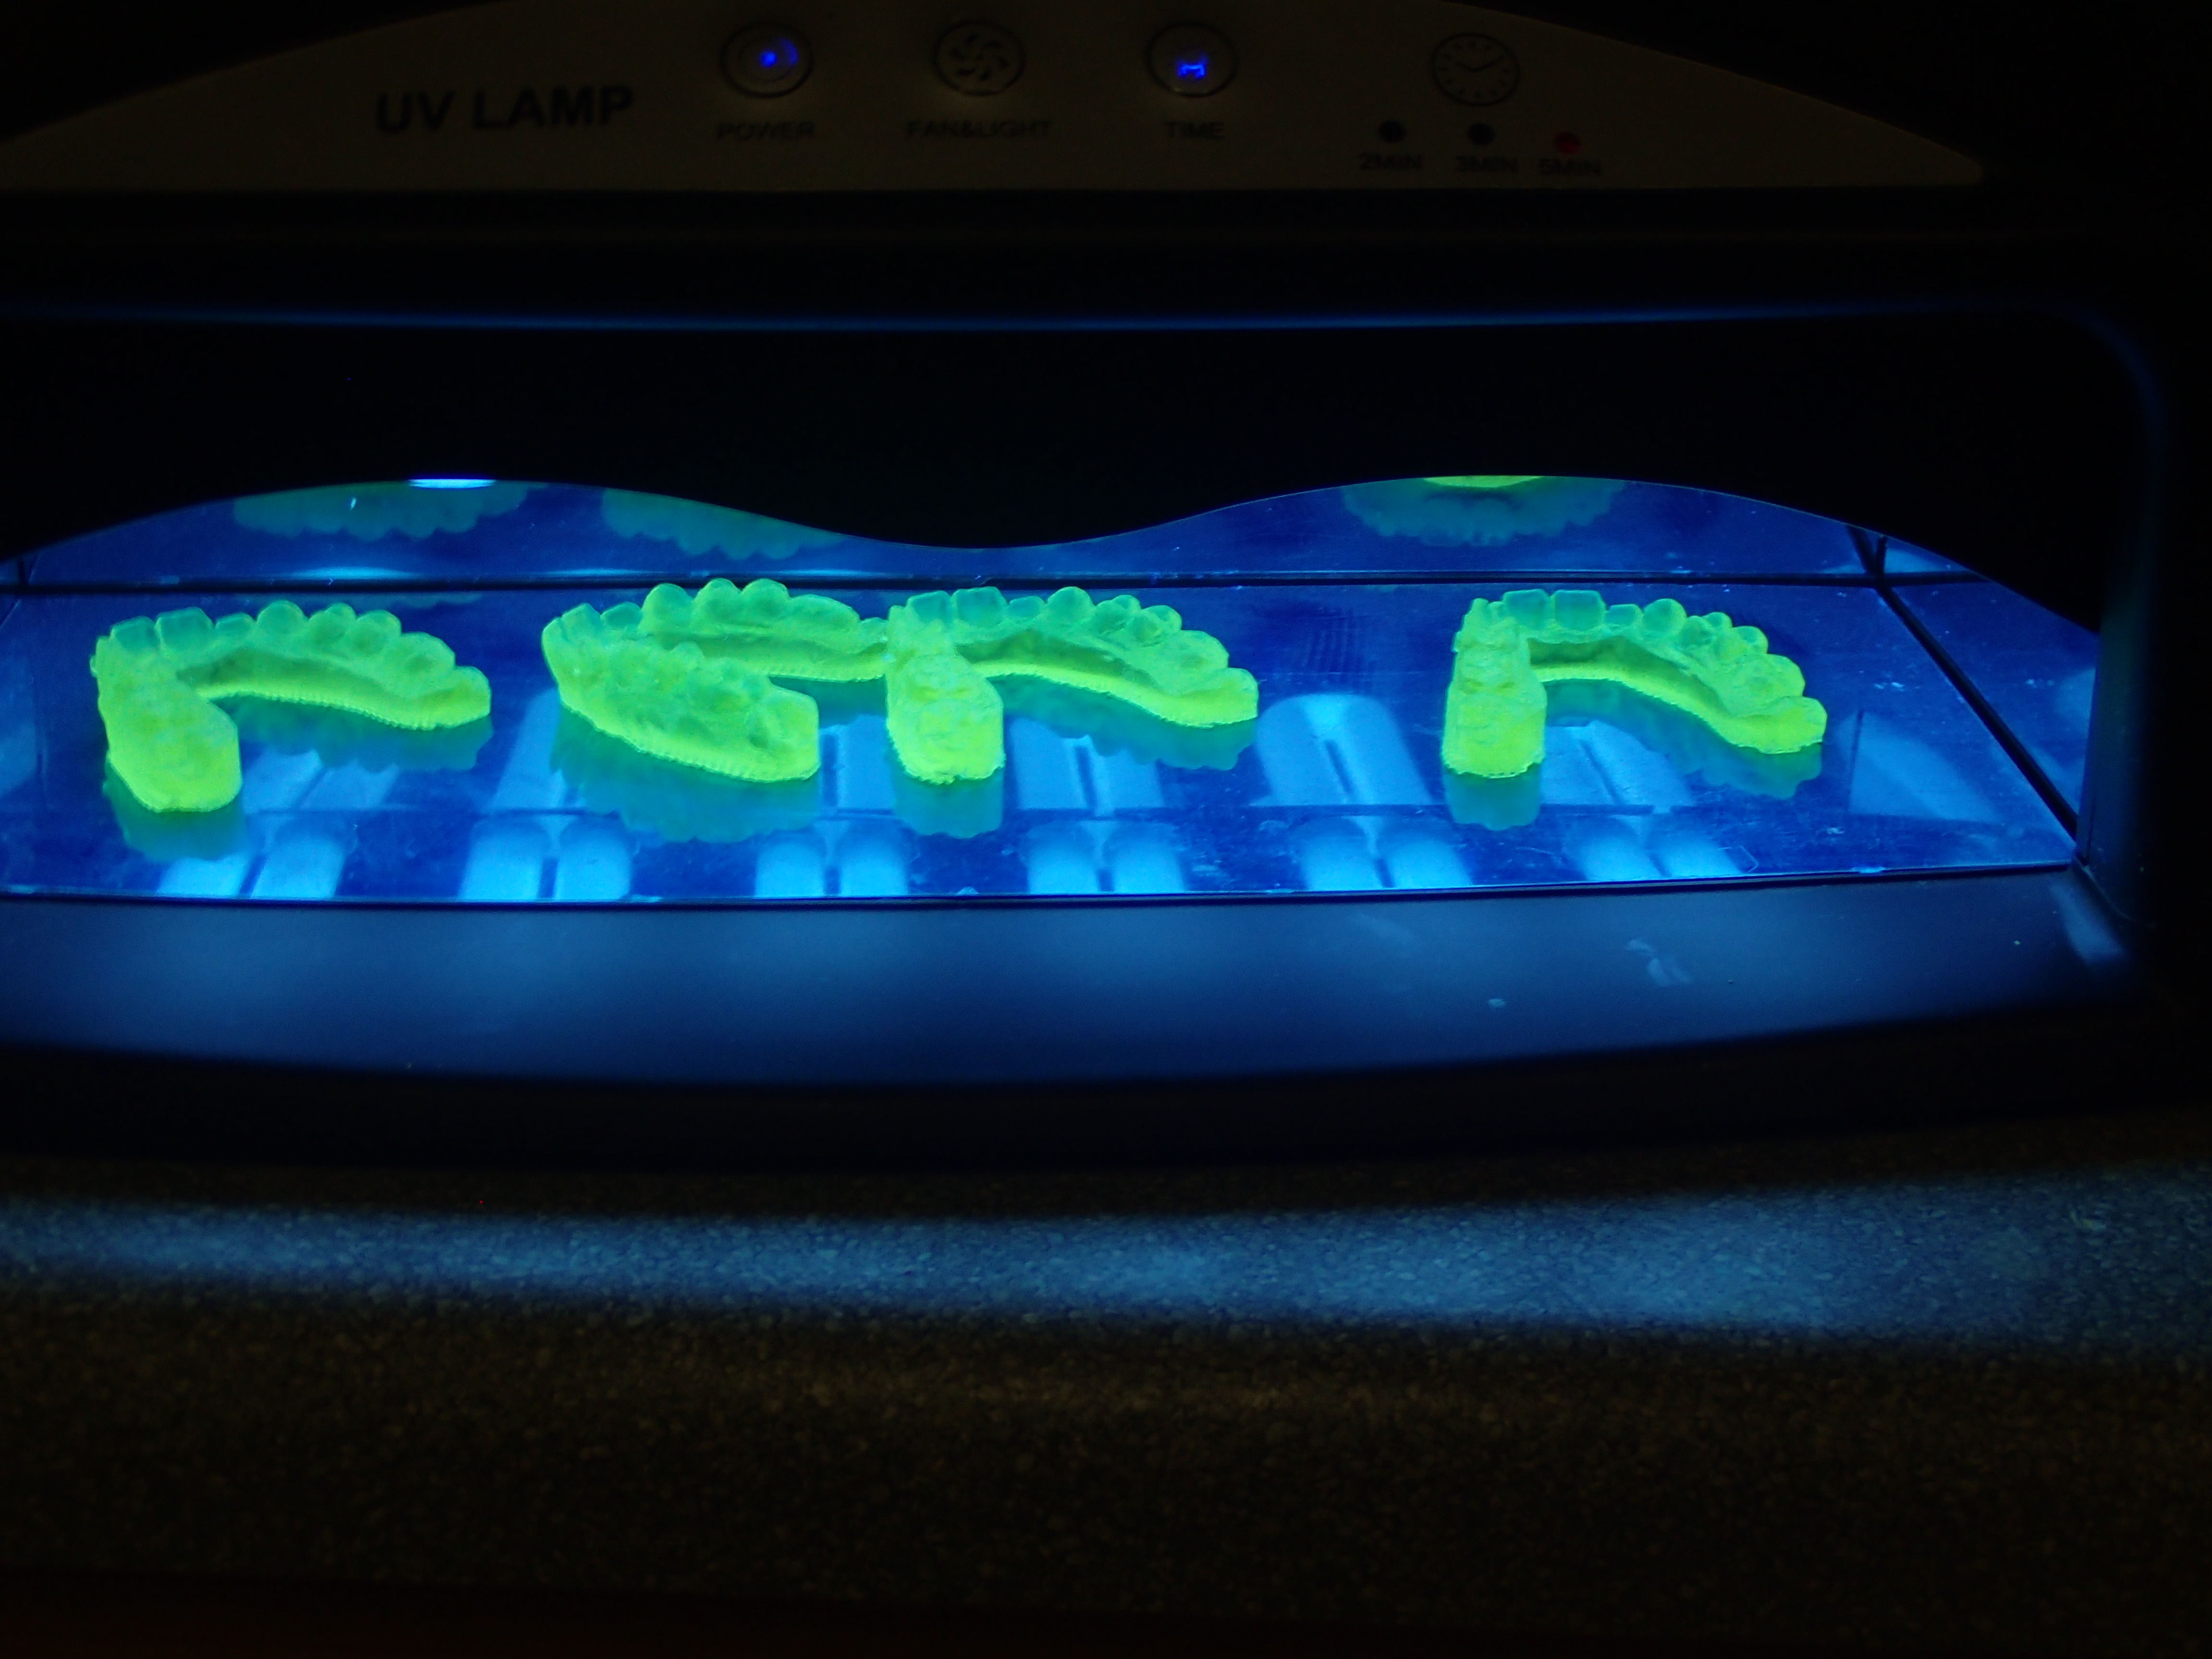 The models are cured under UV light to complete their polymerization process.